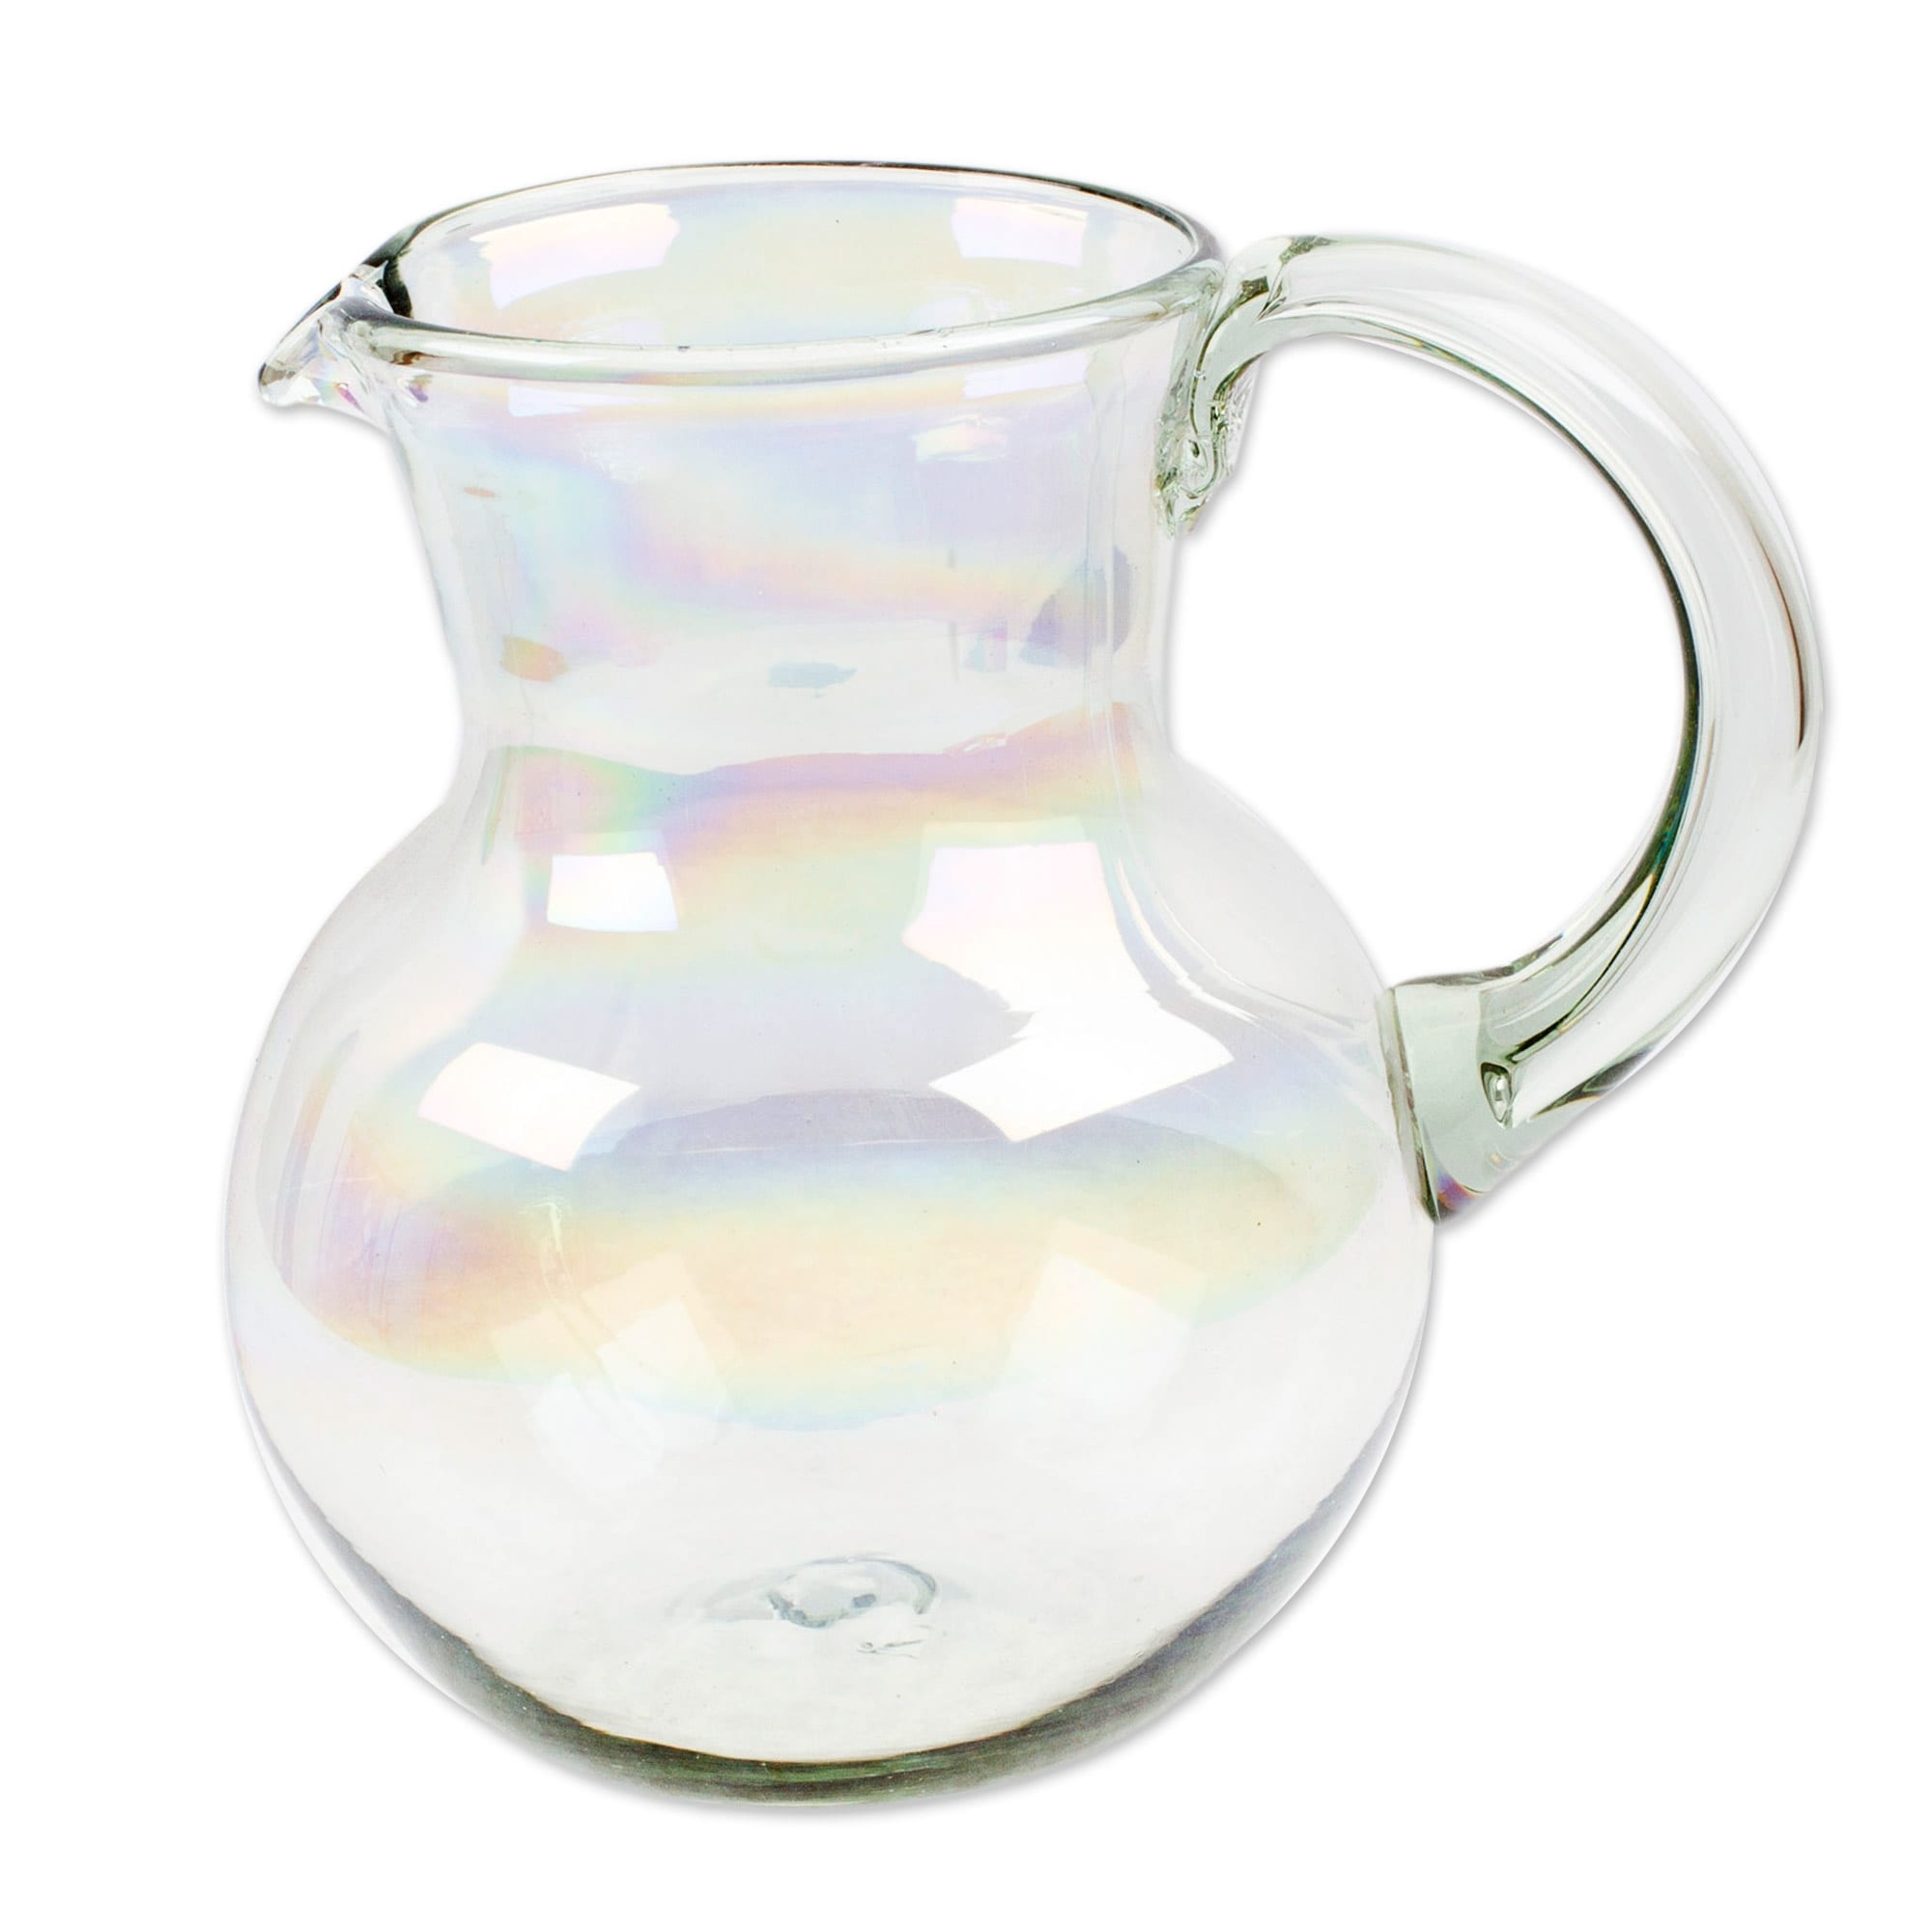 https://ak1.ostkcdn.com/images/products/is/images/direct/7323e890823d6546d80e8bf8876af7b3759ba54f/Novica-Handmade-Ethereal-Handblown-Glass-Pitcher.jpg